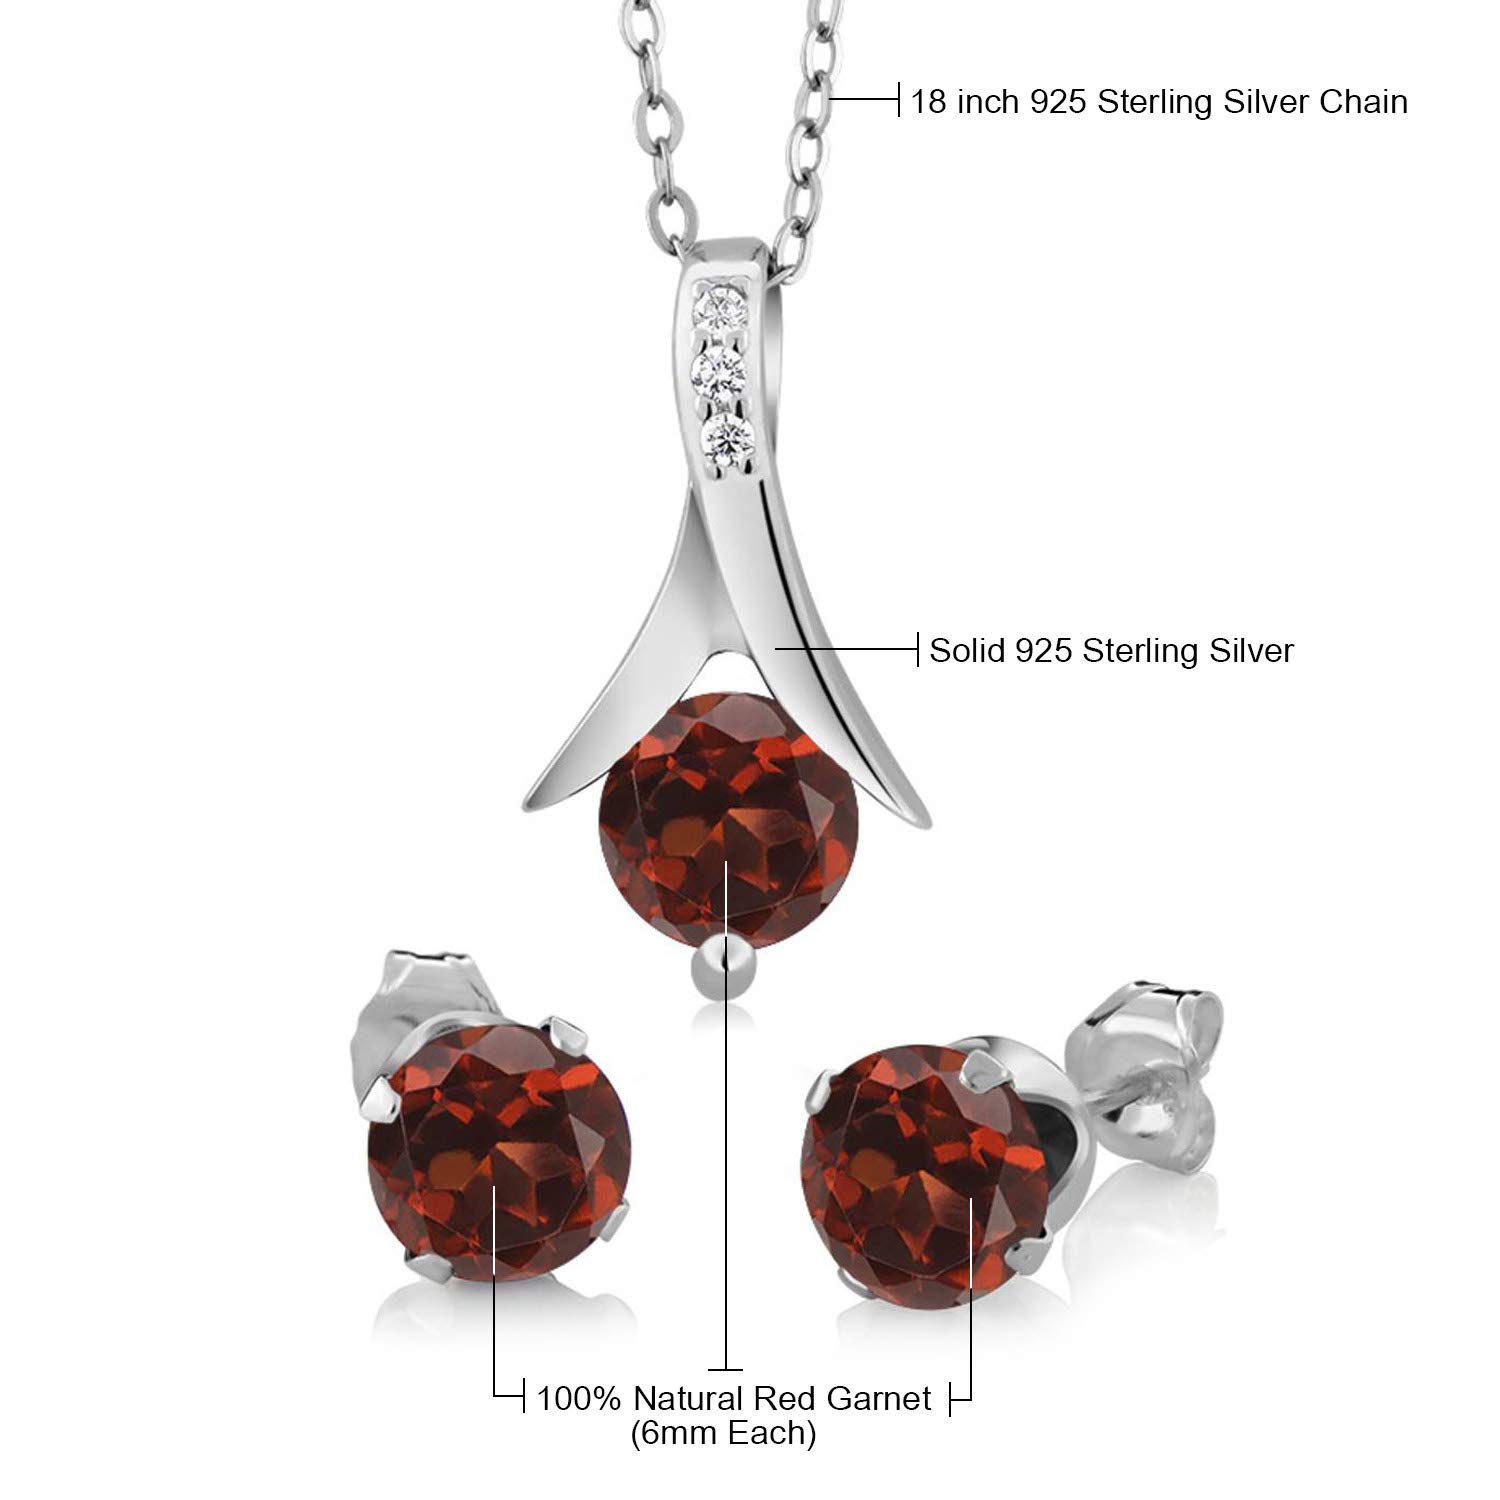 Gem Stone King 925 Sterling Silver Red Garnet Earring and Pendant Set For Women (2.25 Cttw, Gemstone Birthstone, 6MM Each Garnet, With 18 Inch Silver Chain)